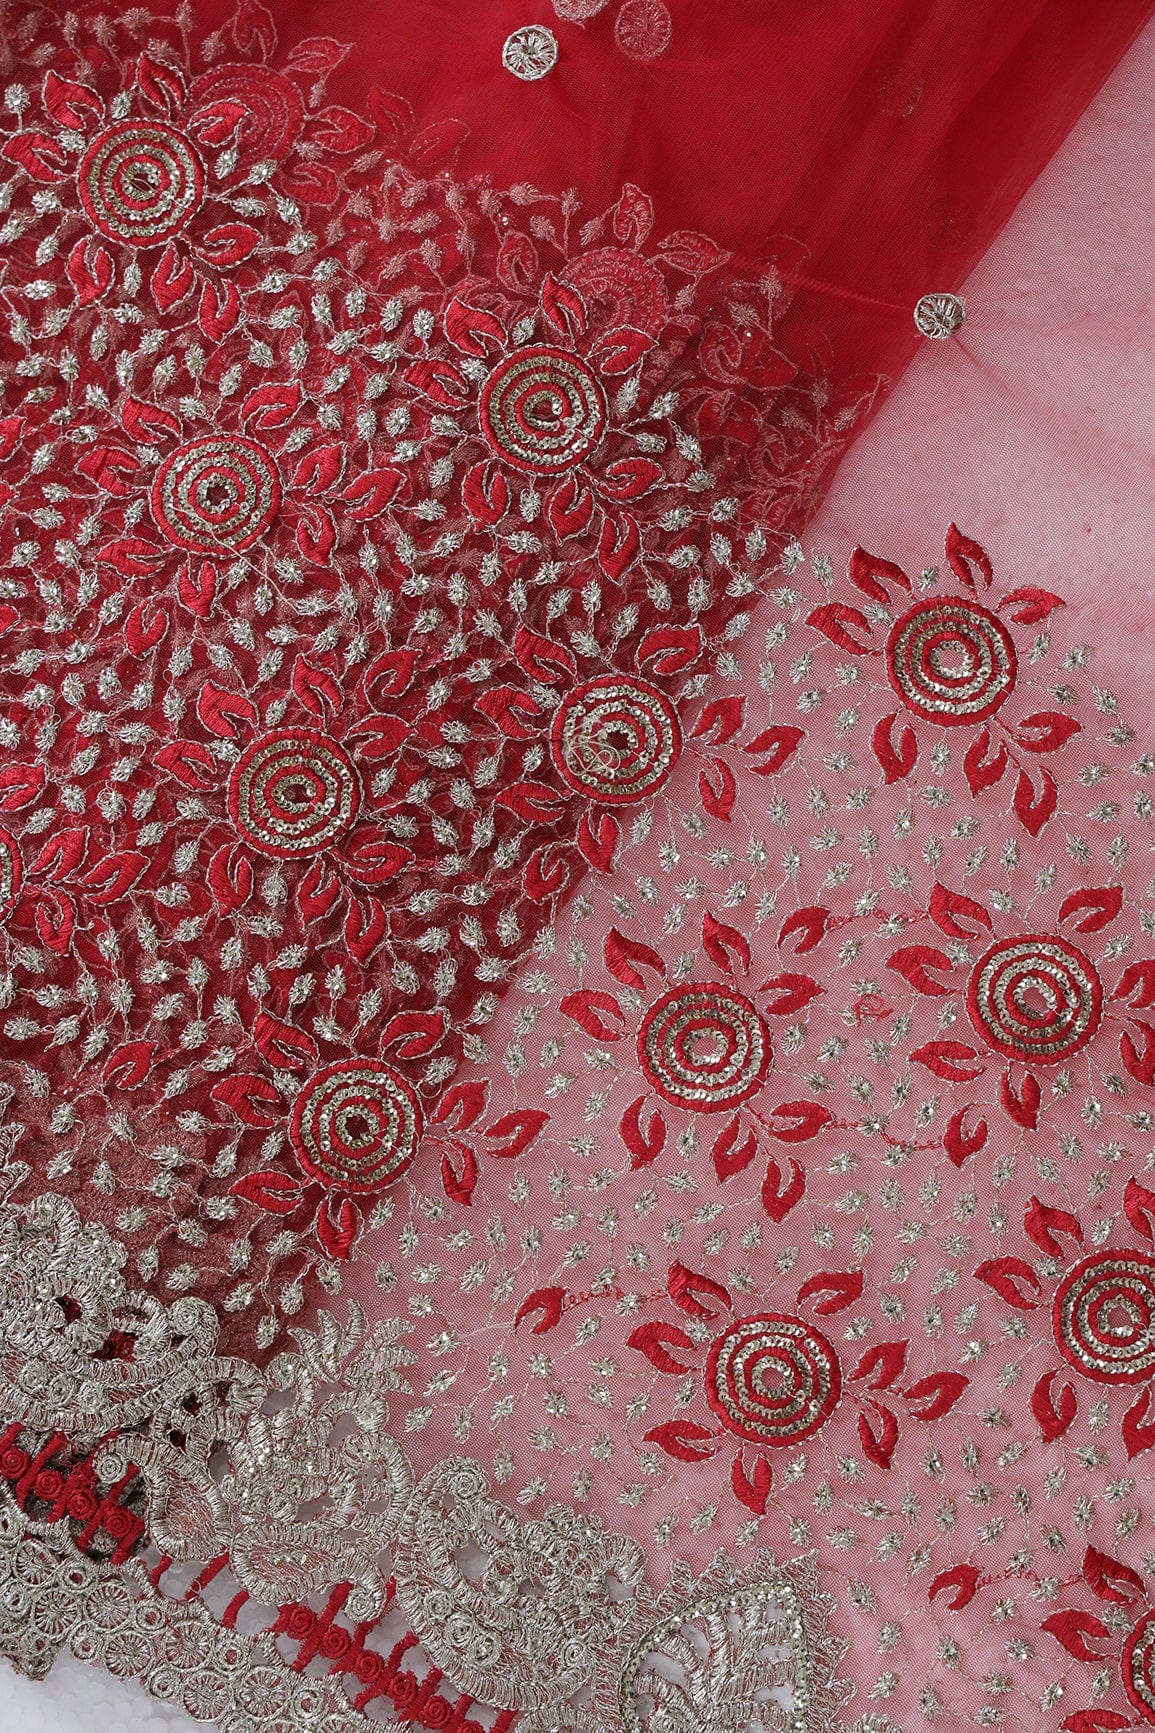 doeraa Embroidery Fabrics Big Width''56'' Red Thread With Zari Floral Embroidery Work On Red Soft Net Fabric With Border